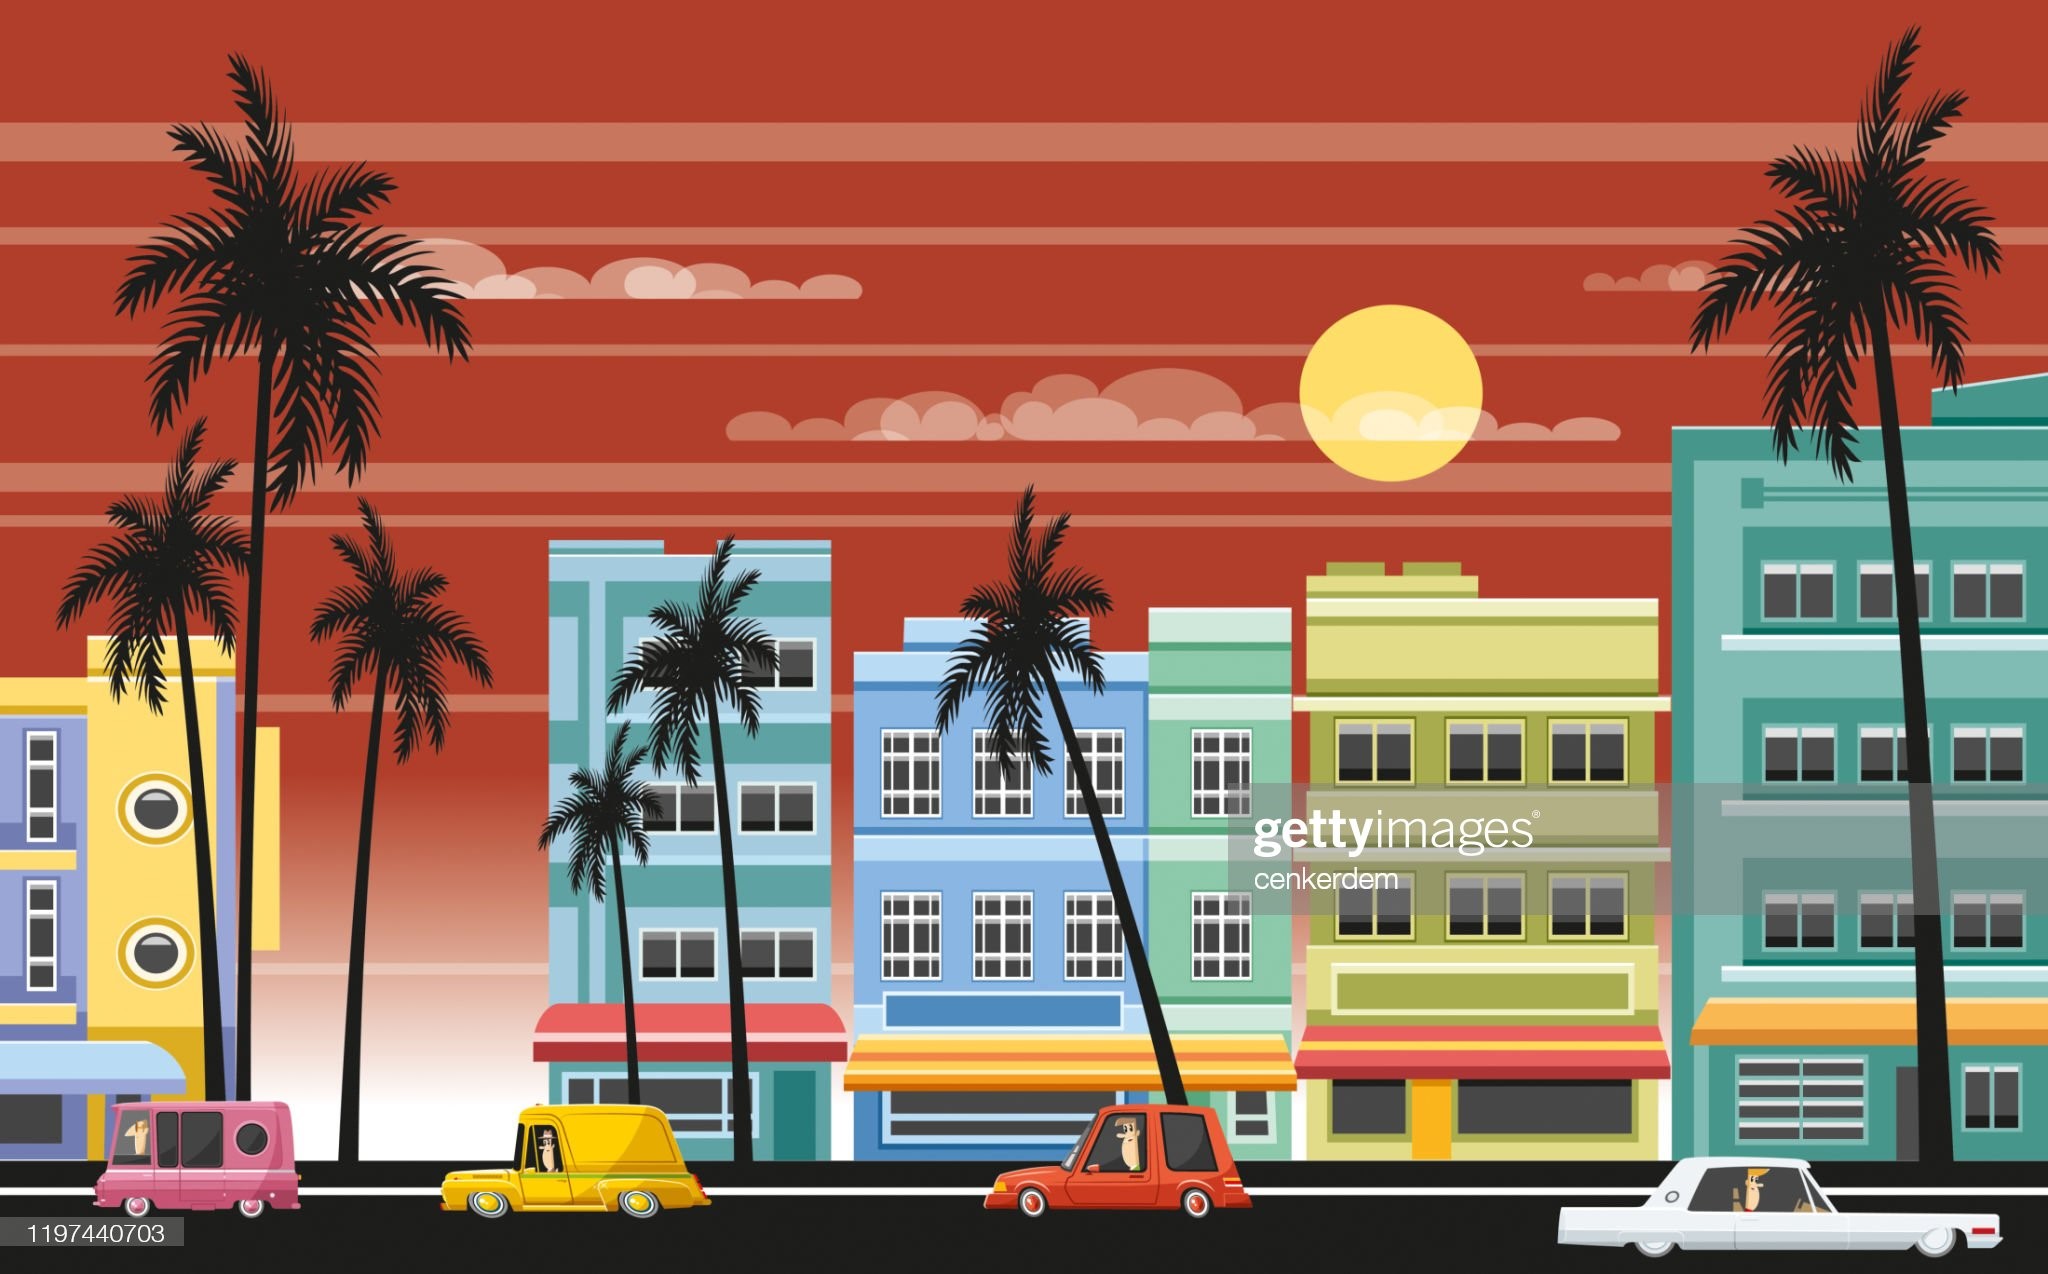 A poster of Miami.